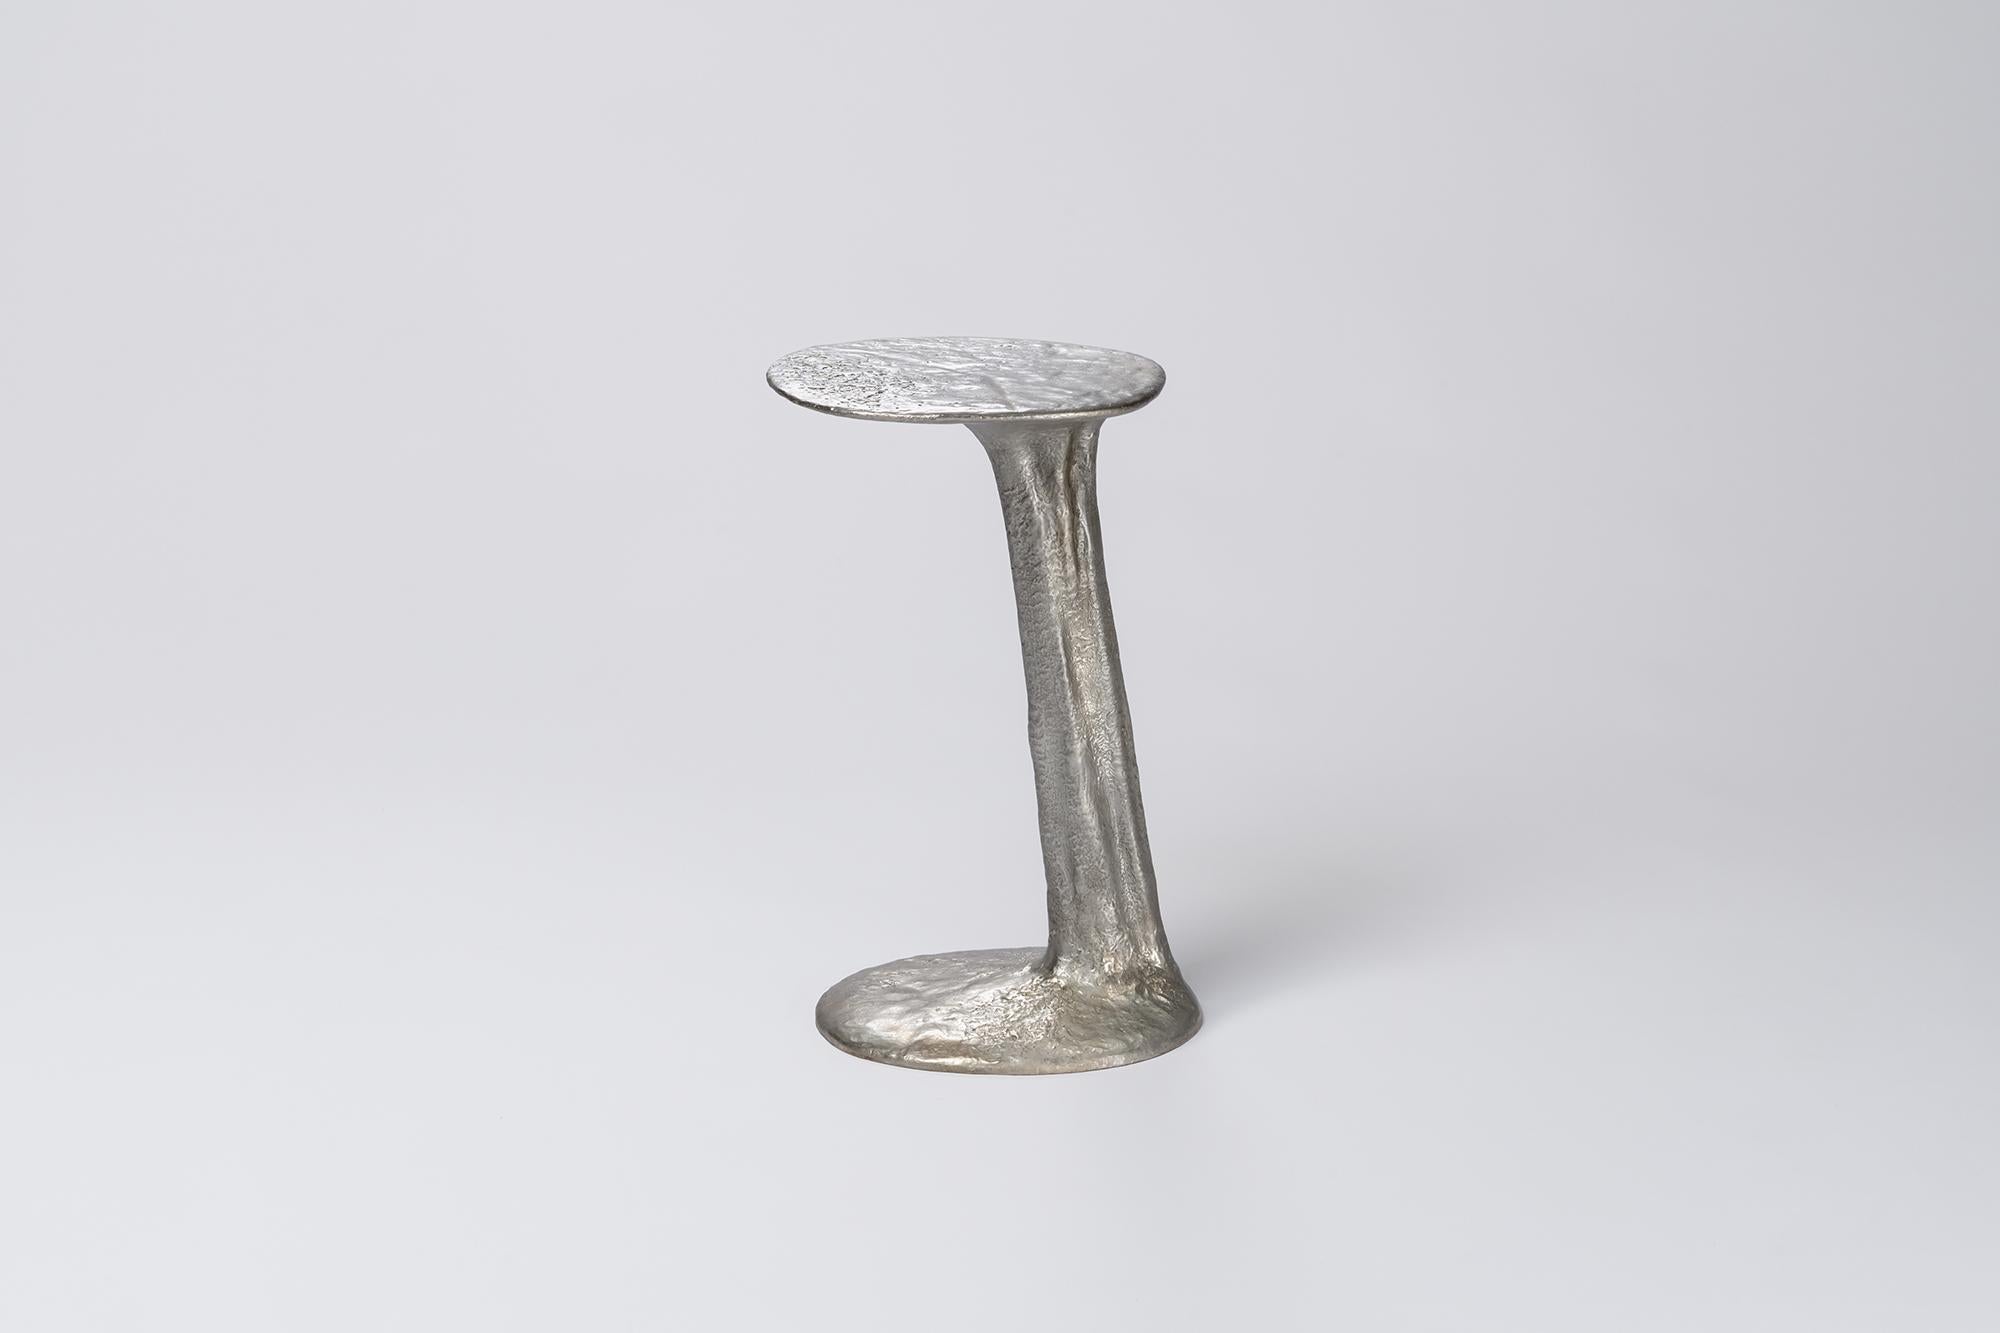 Silver Cast Brass Lava Small Side Table by Atelier V&F
Dimensions: D 35 x W 30 x H 53 cm. 
Materials: Cast brass with a silver finish.

Available in different finishes (cast, black and silver). Available in two different sizes. Prices may vary.